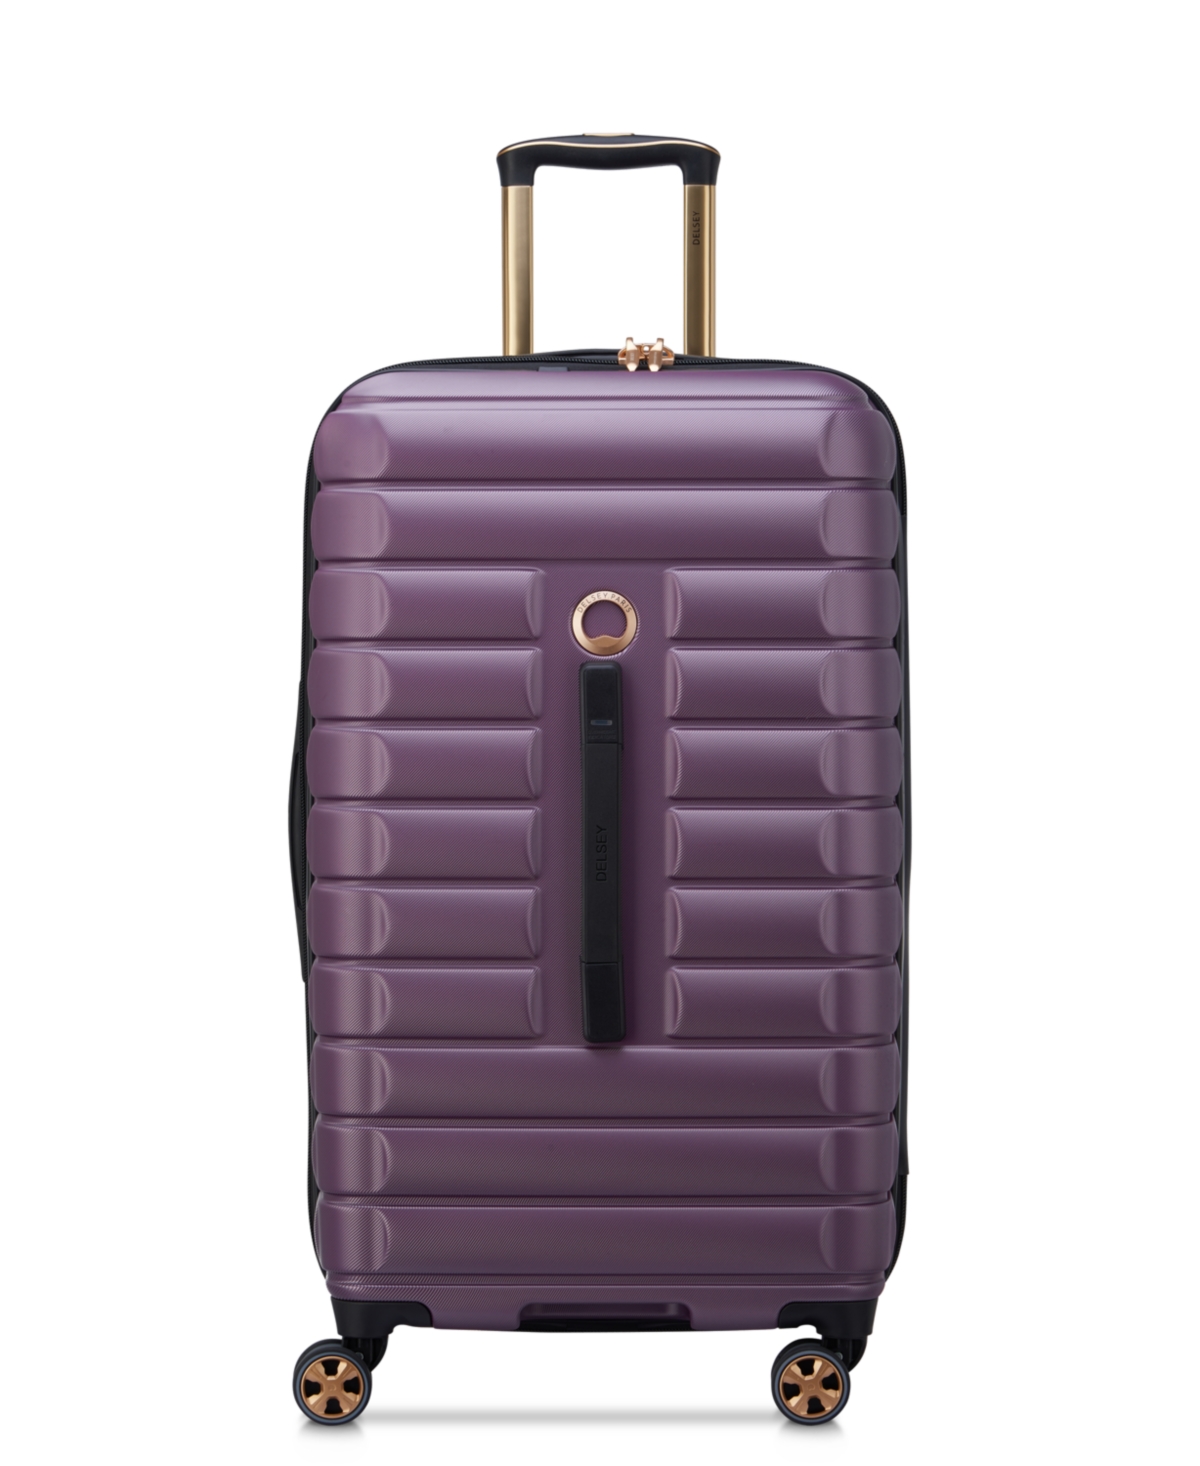 Delsey Shadow 5.0 Trunk 27" Spinner Luggage In Mauve